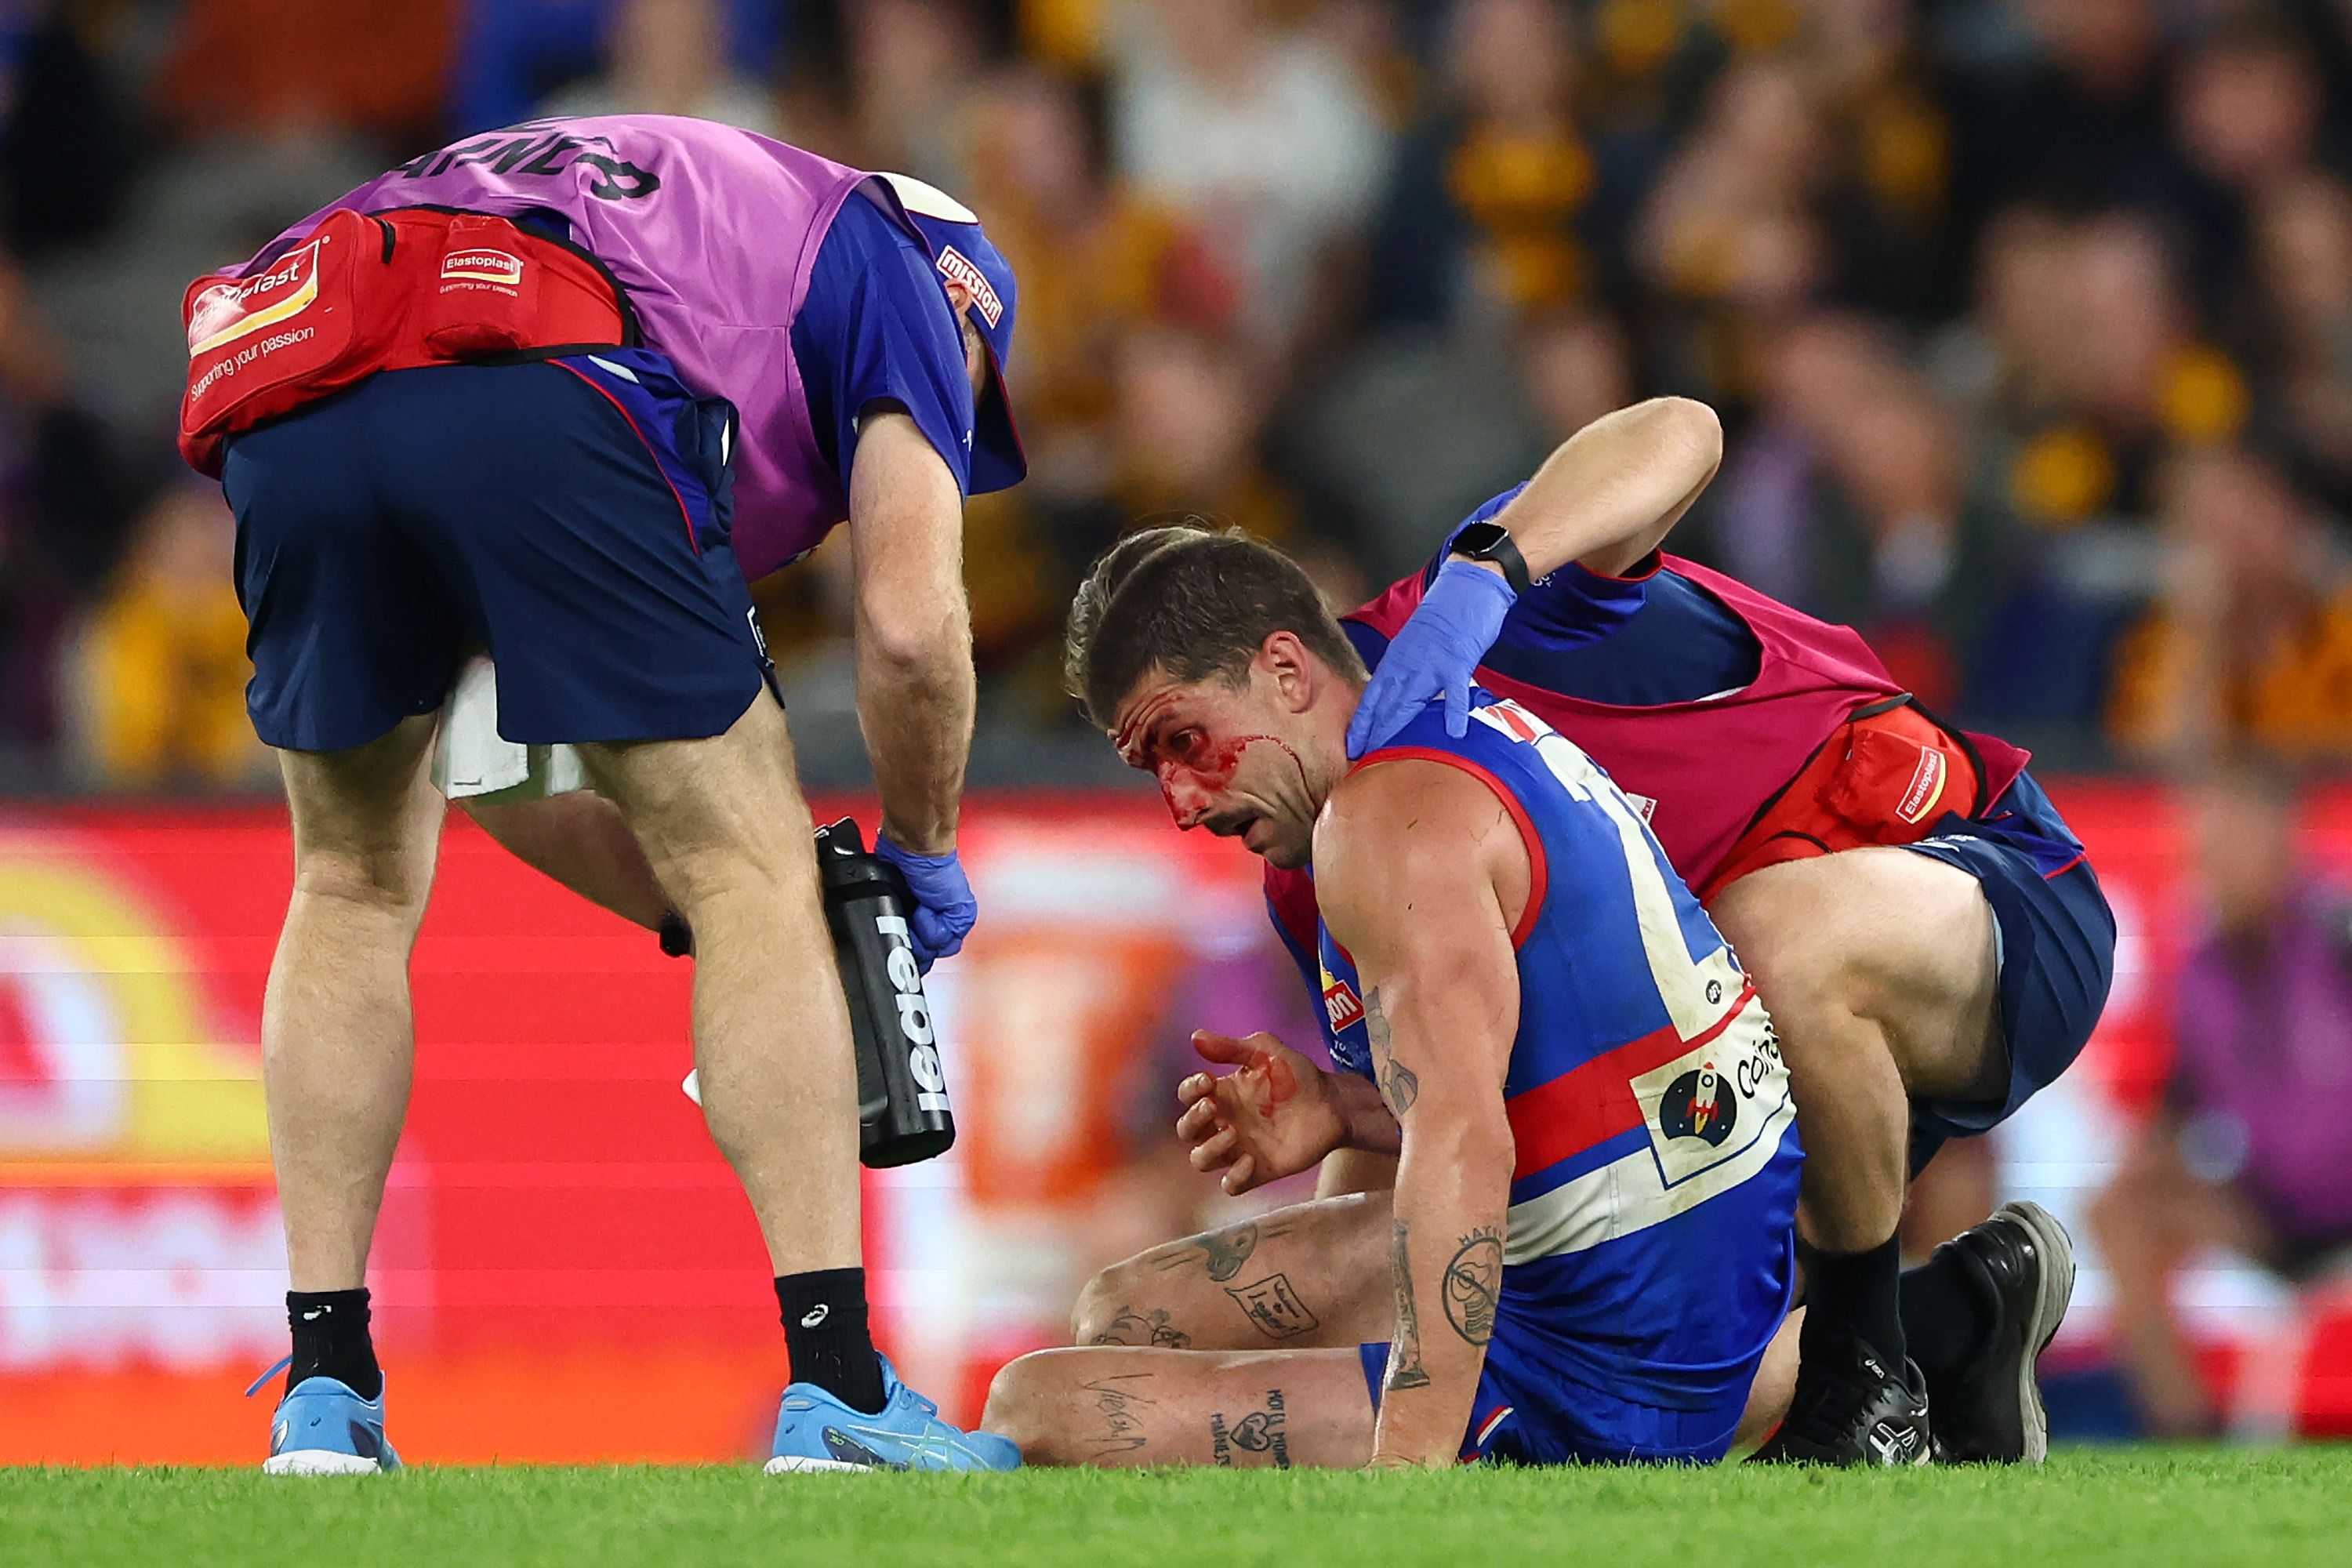 'I would be highly concerned': Tom Liberatore urged to consider retirement after fourth concussion in 12 months